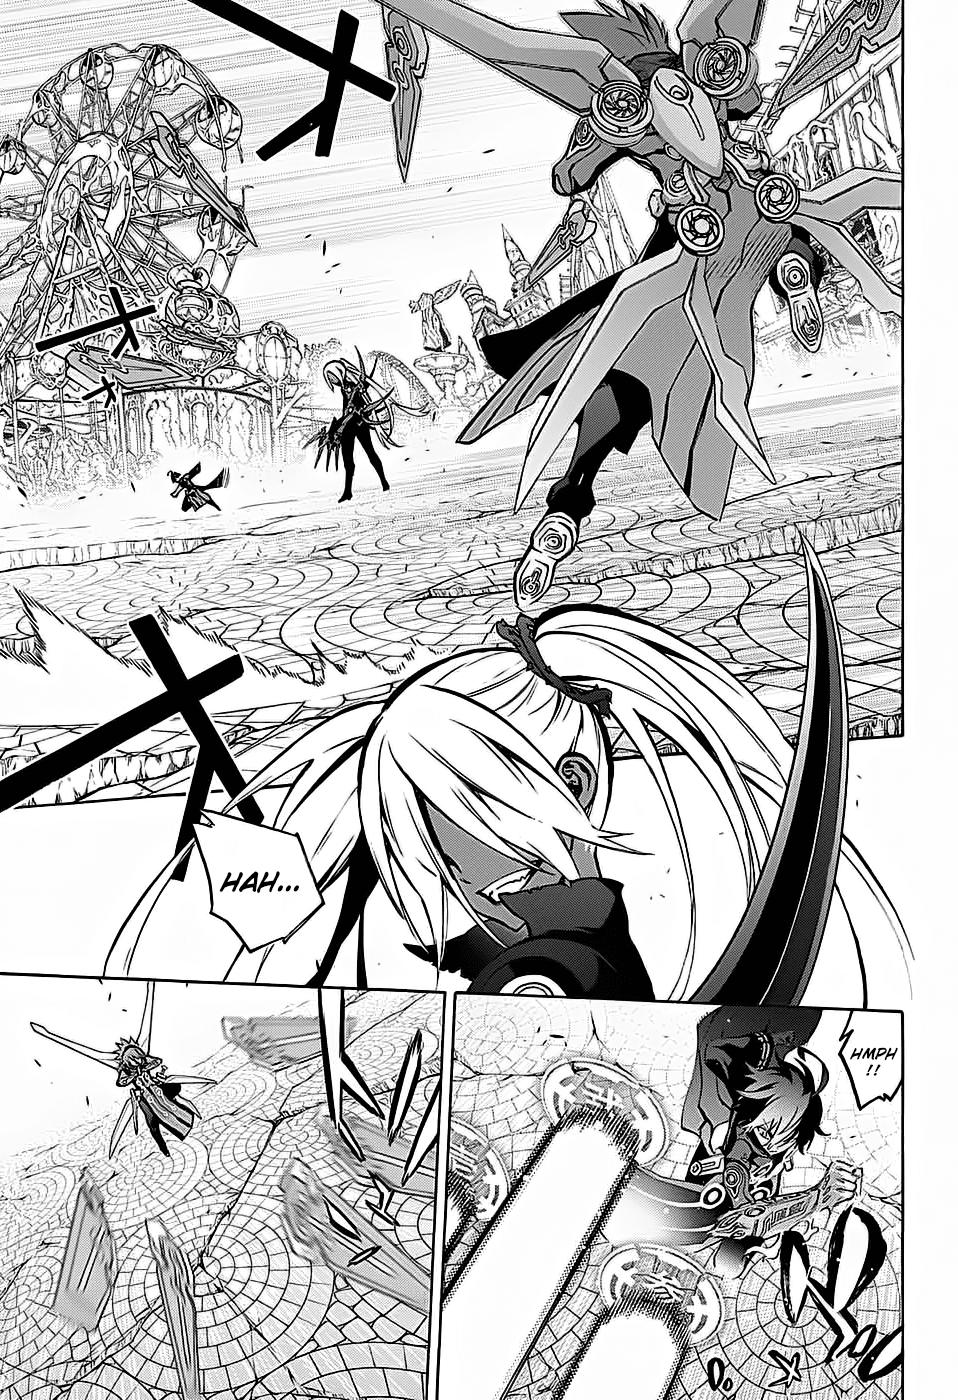 Sousei No Onmyouji Chapter 28 : A Black Birth Cry  